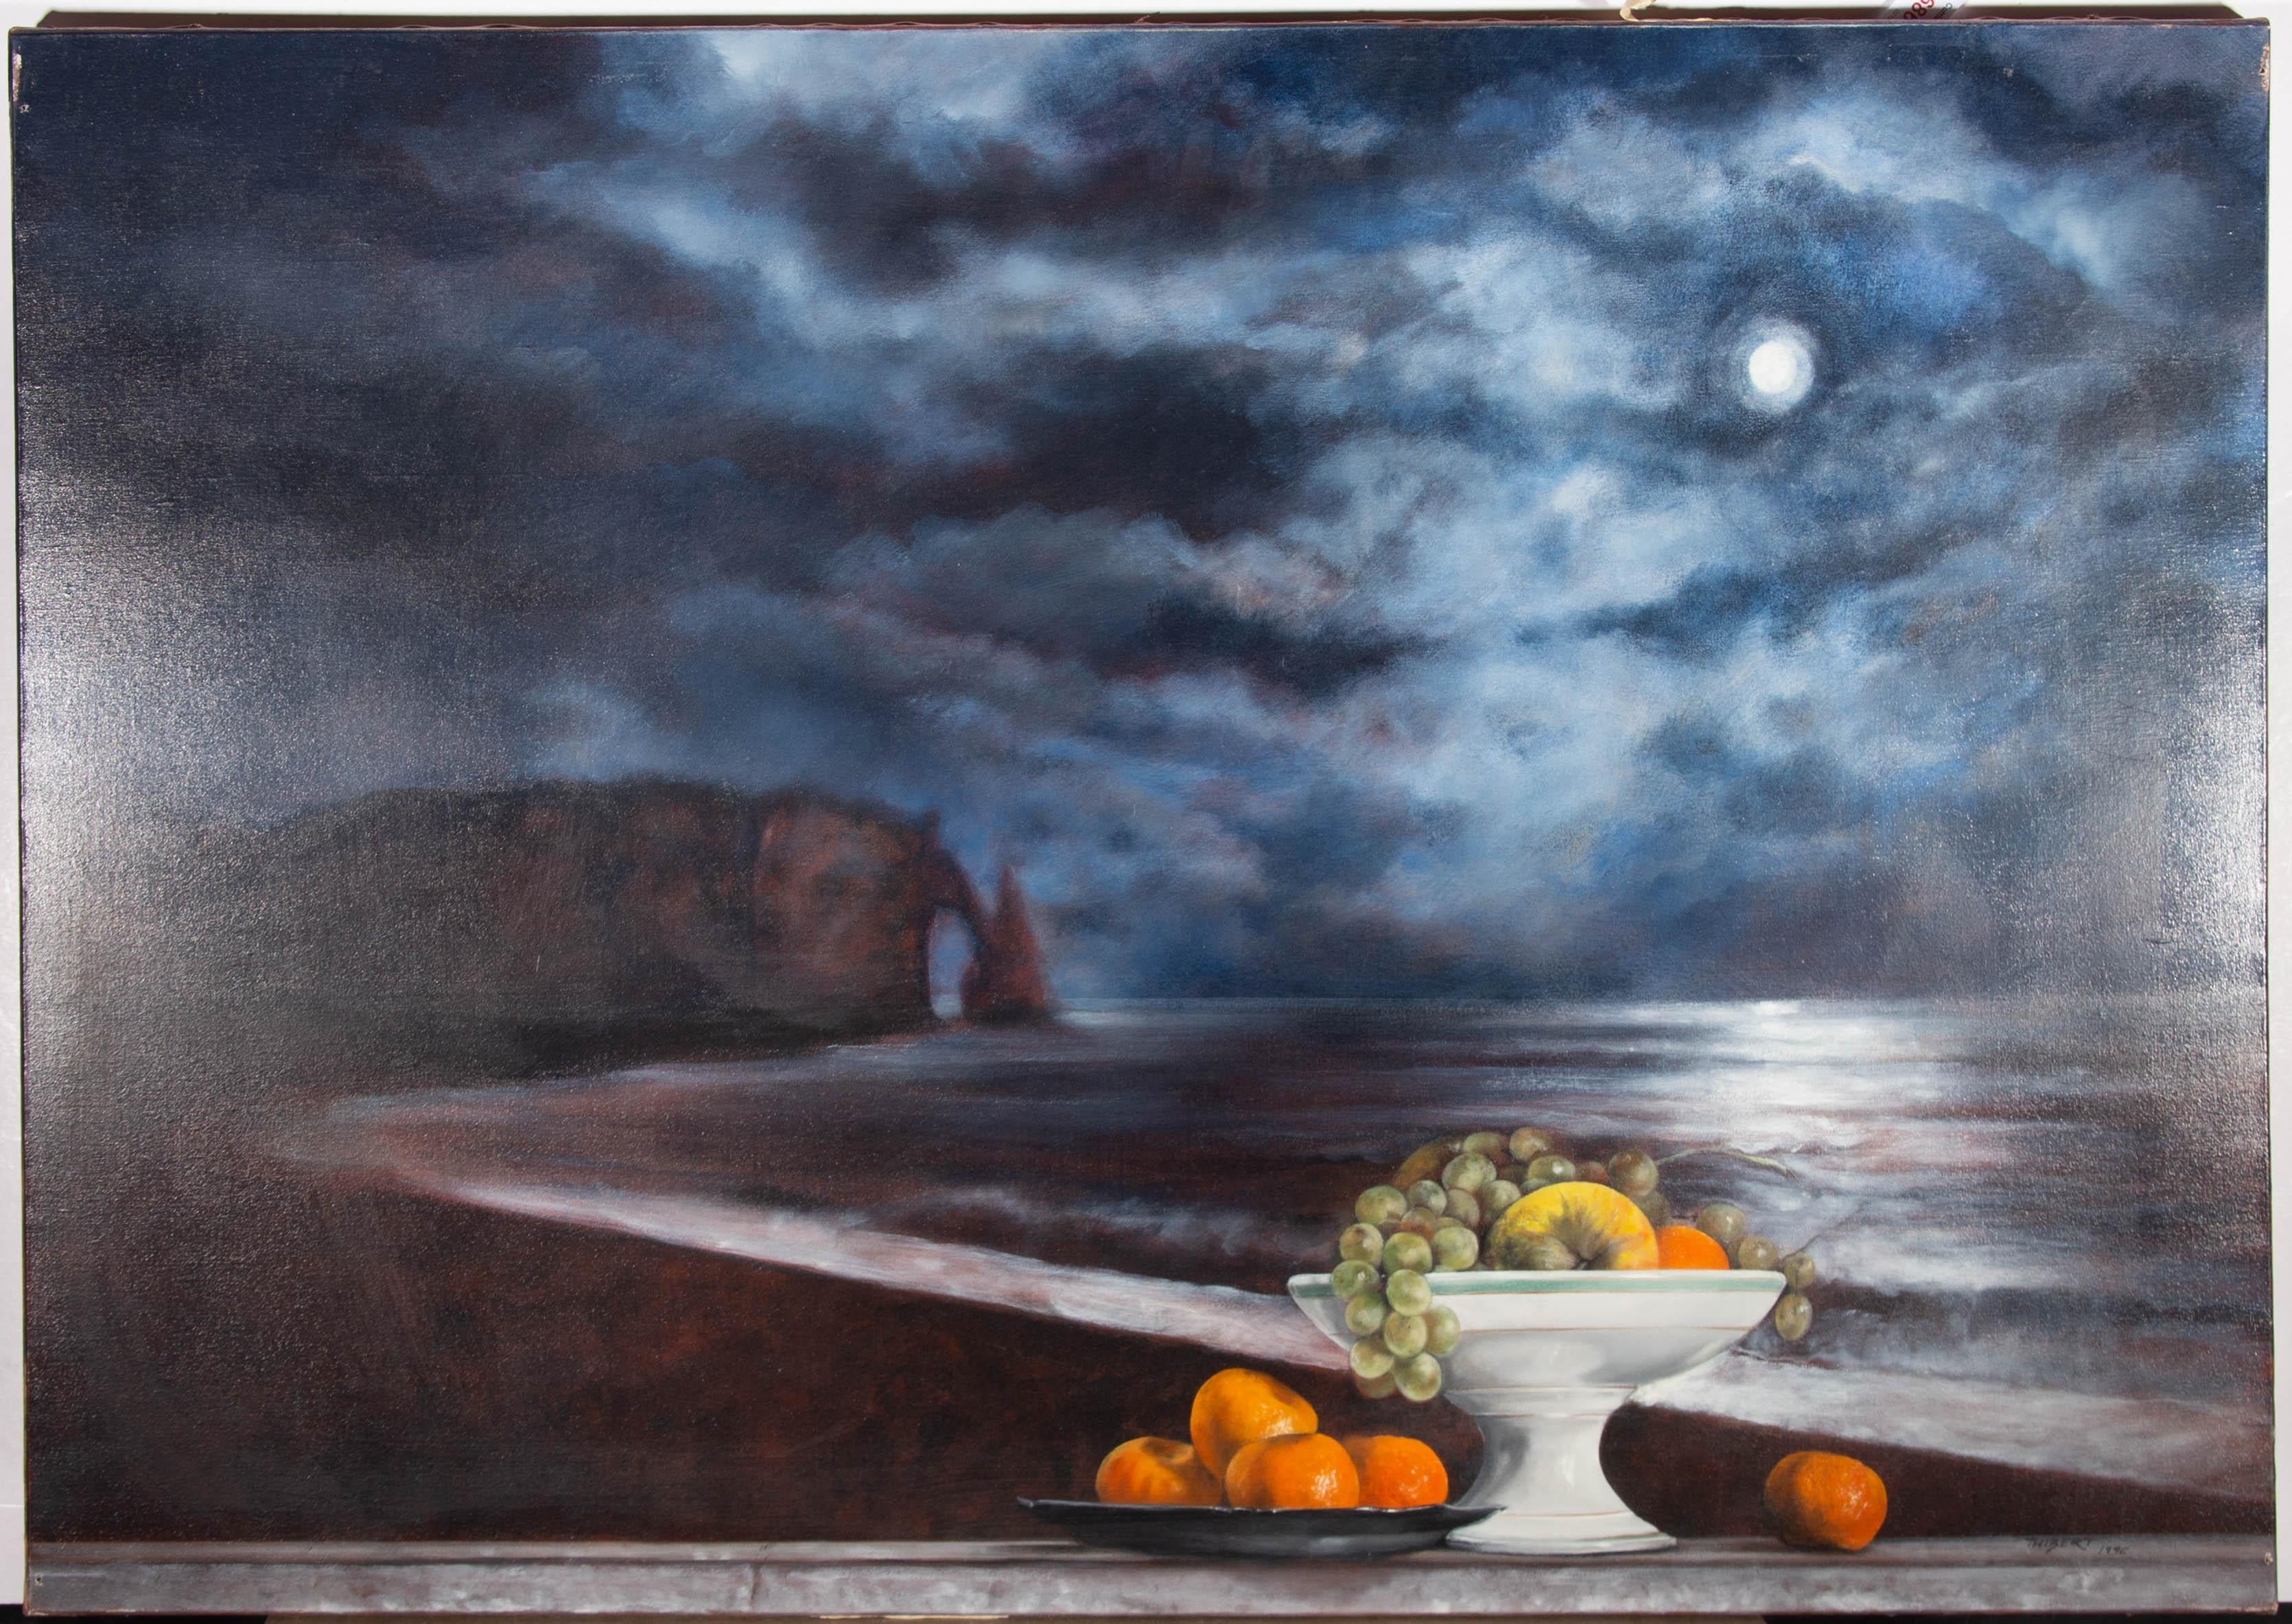 This surreal still life depicts a bowl of fruit before a coastal view. Moonlight illuminates the scene, shining down on the cliffside and crashing waves as well as the carefully placed still life subject. The artist has captured this atmospheric